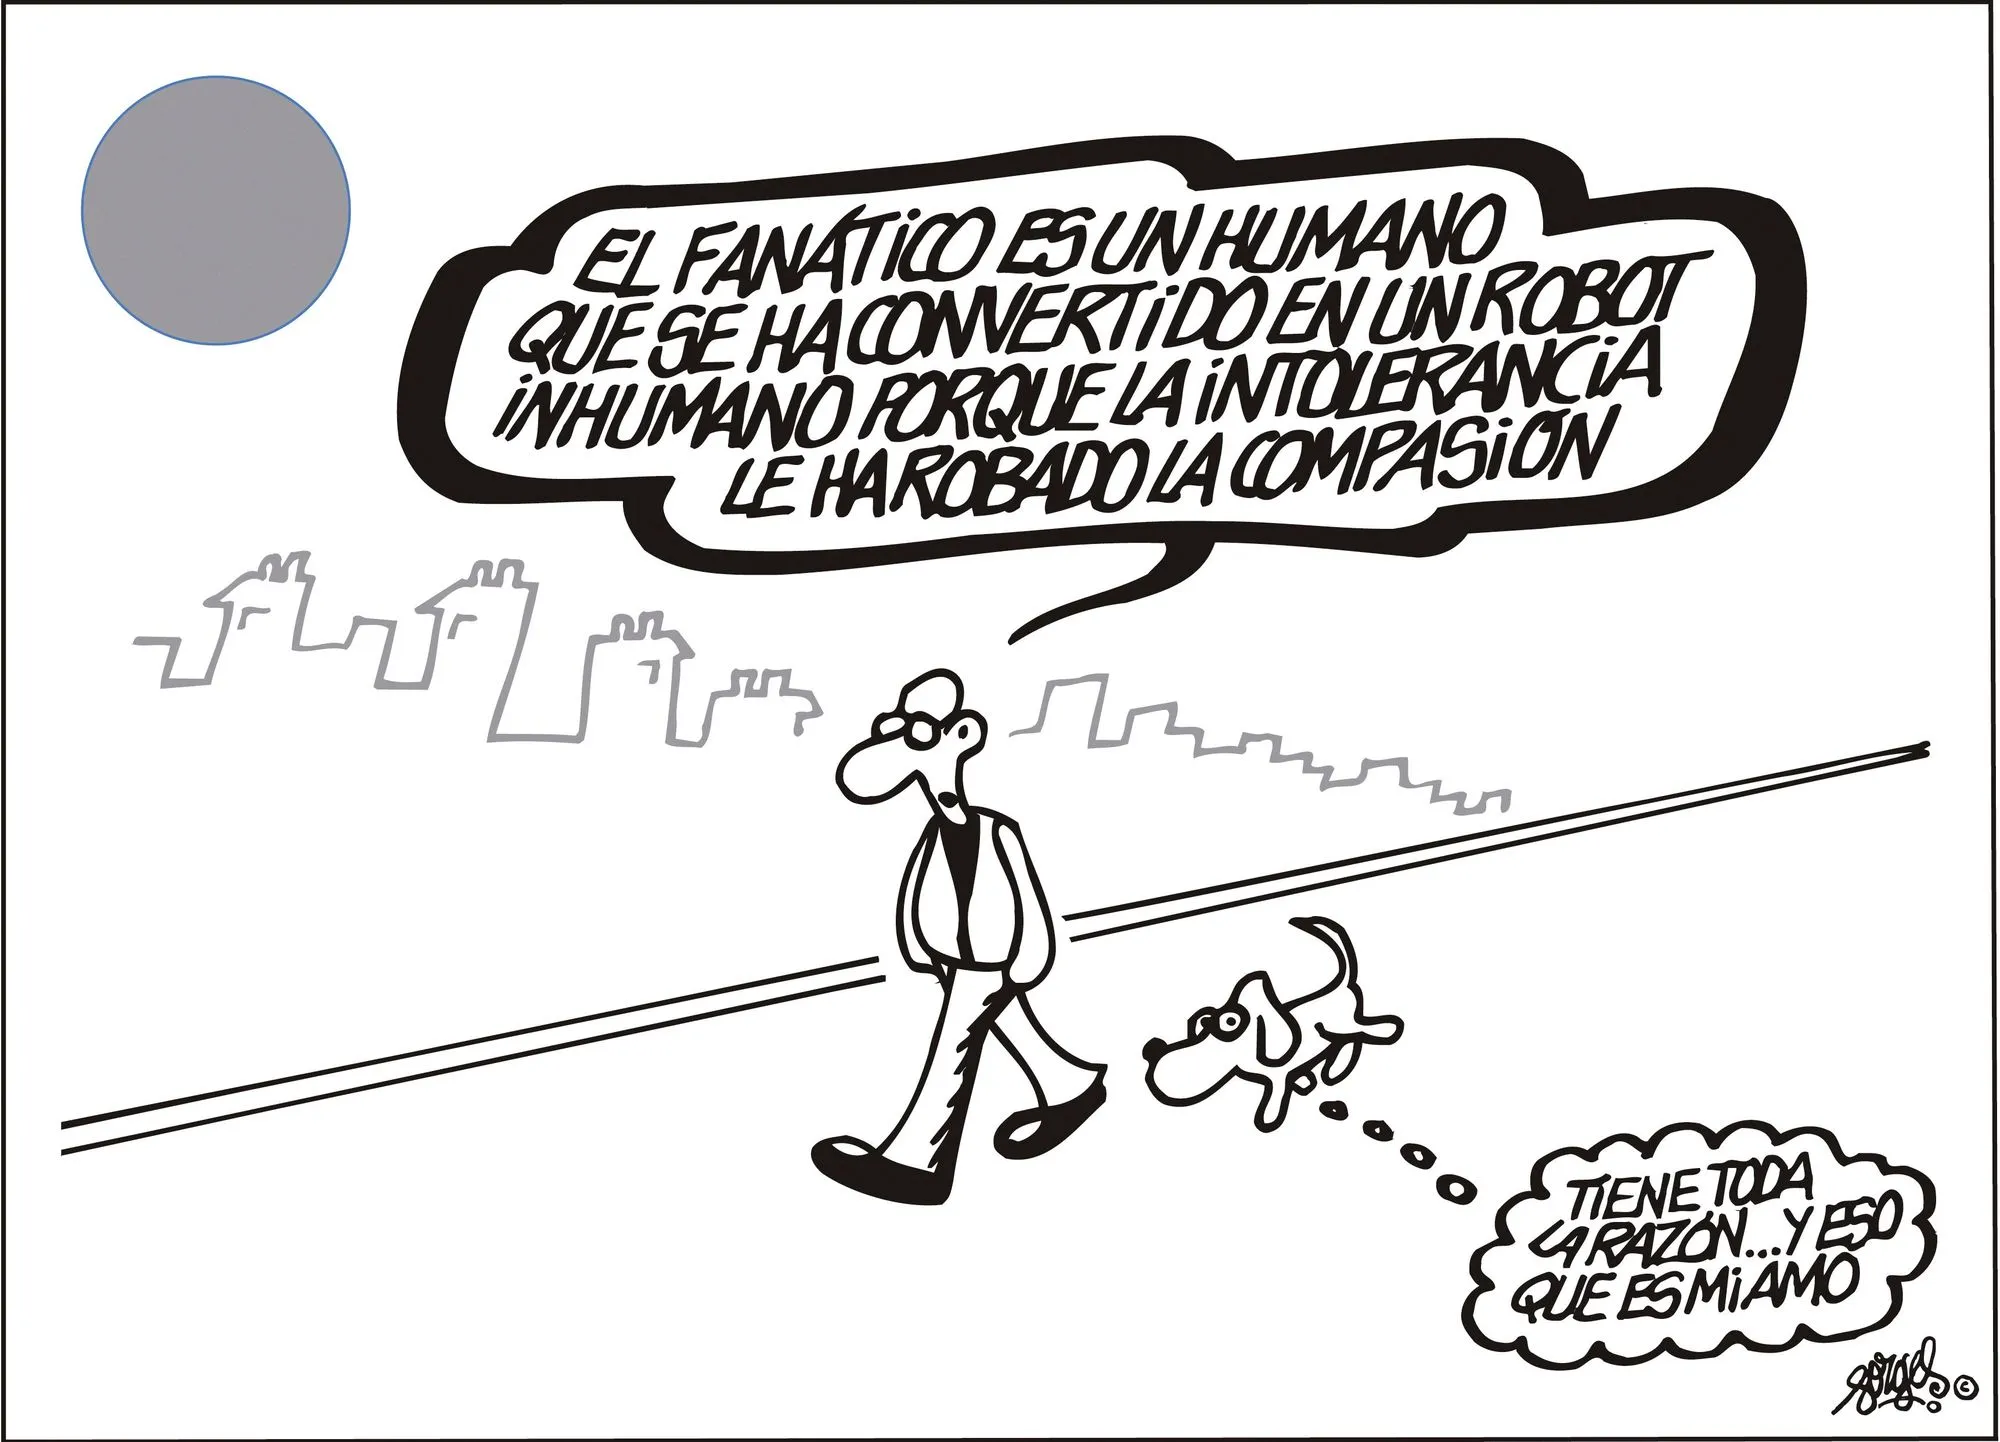 Forges, 2015.